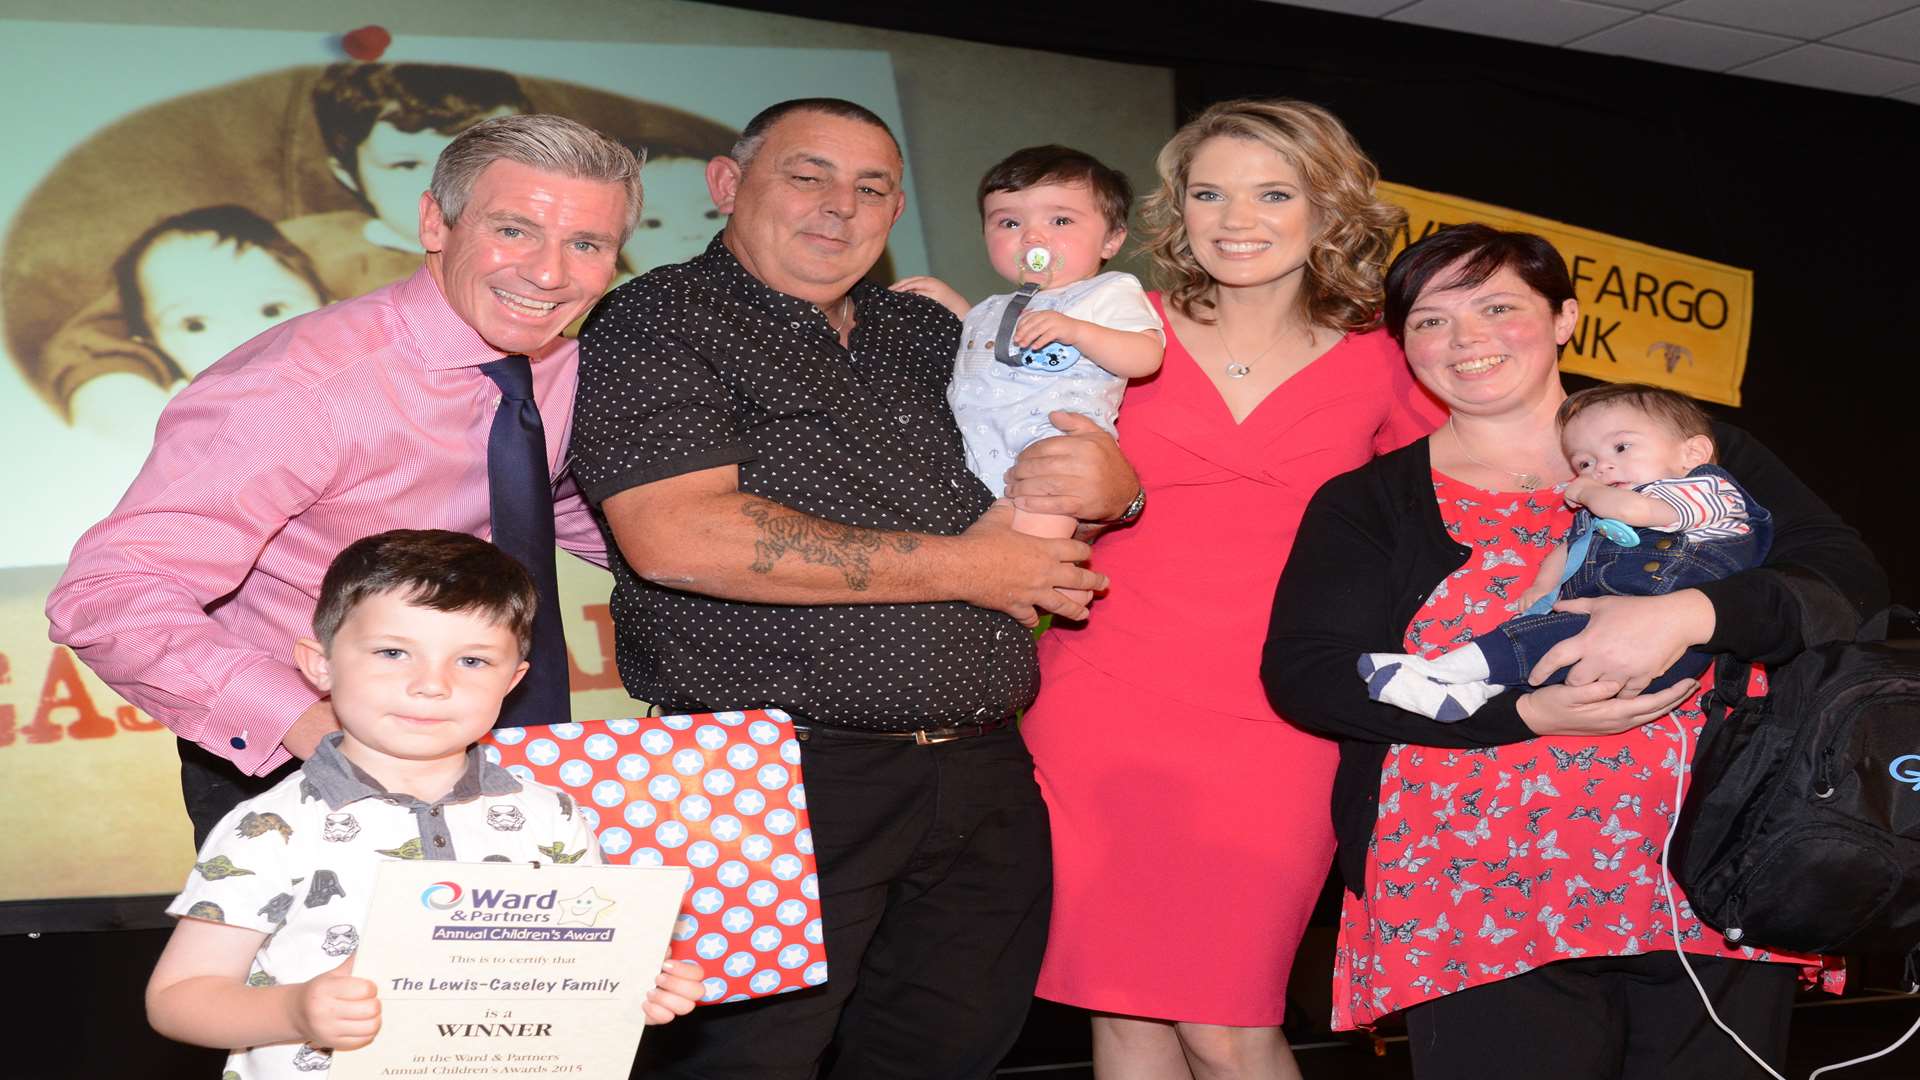 Charlotte Hawkins and Keith Lovell presenting award to the Lewis Caseley family